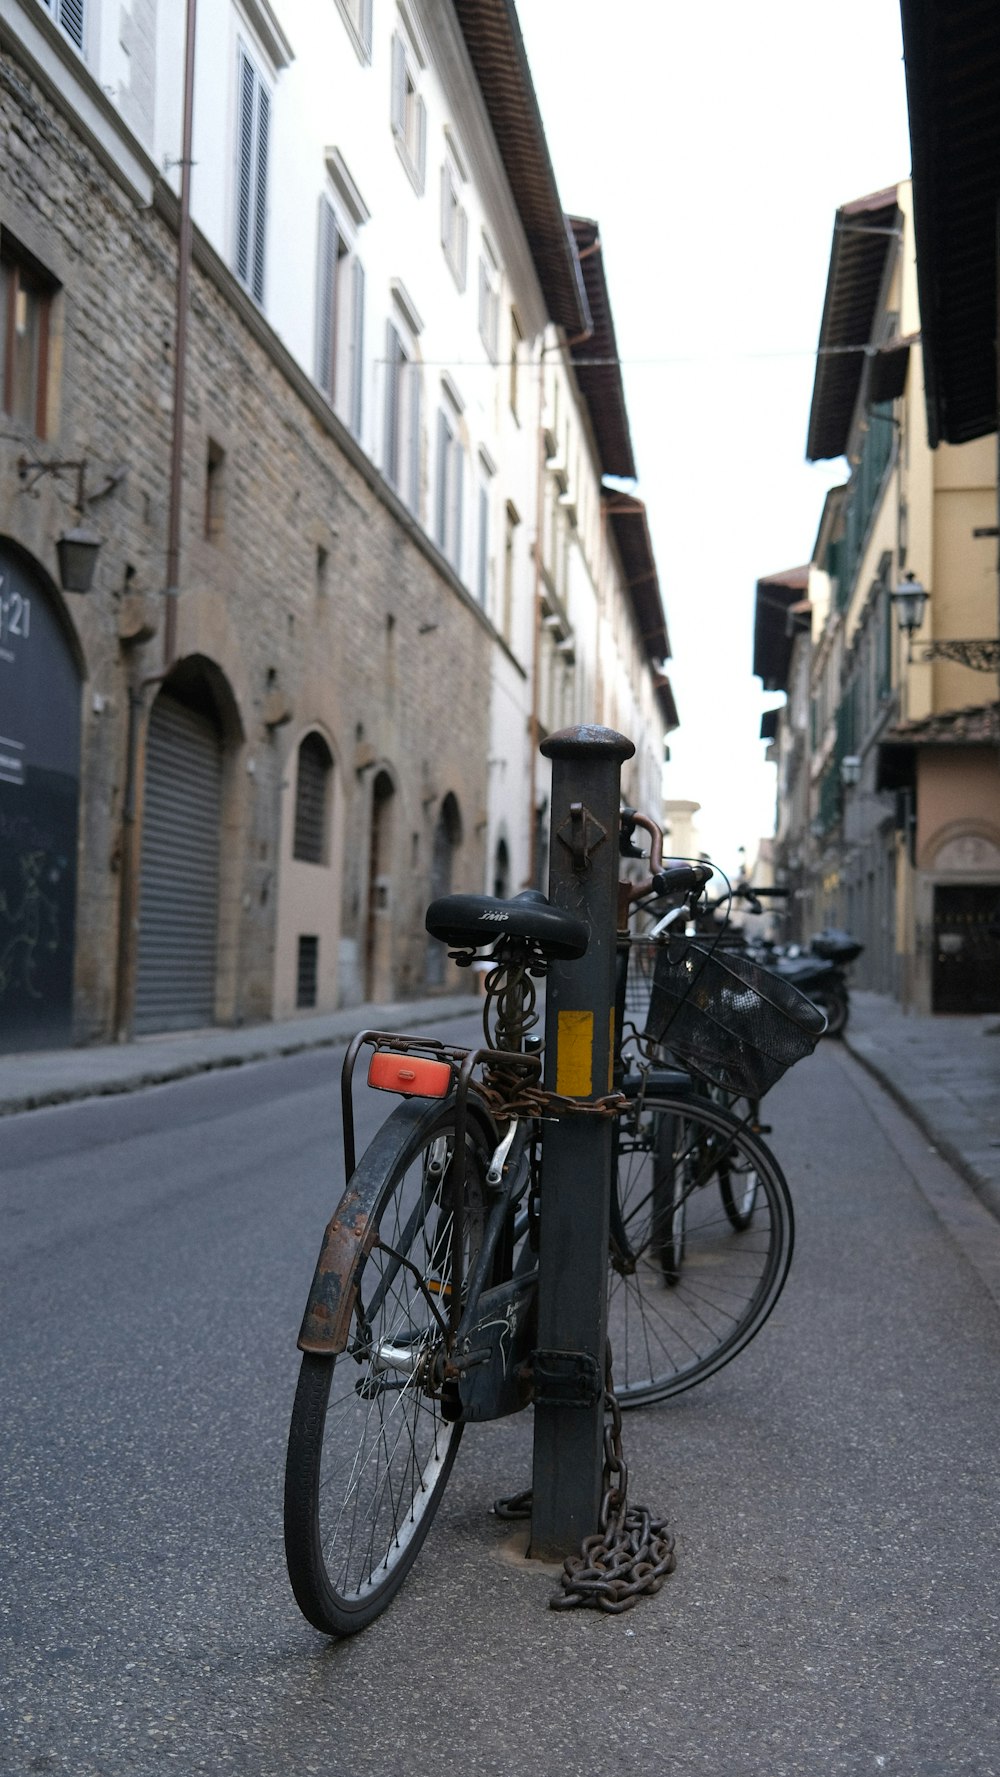 a bike chained to a pole on the side of a street